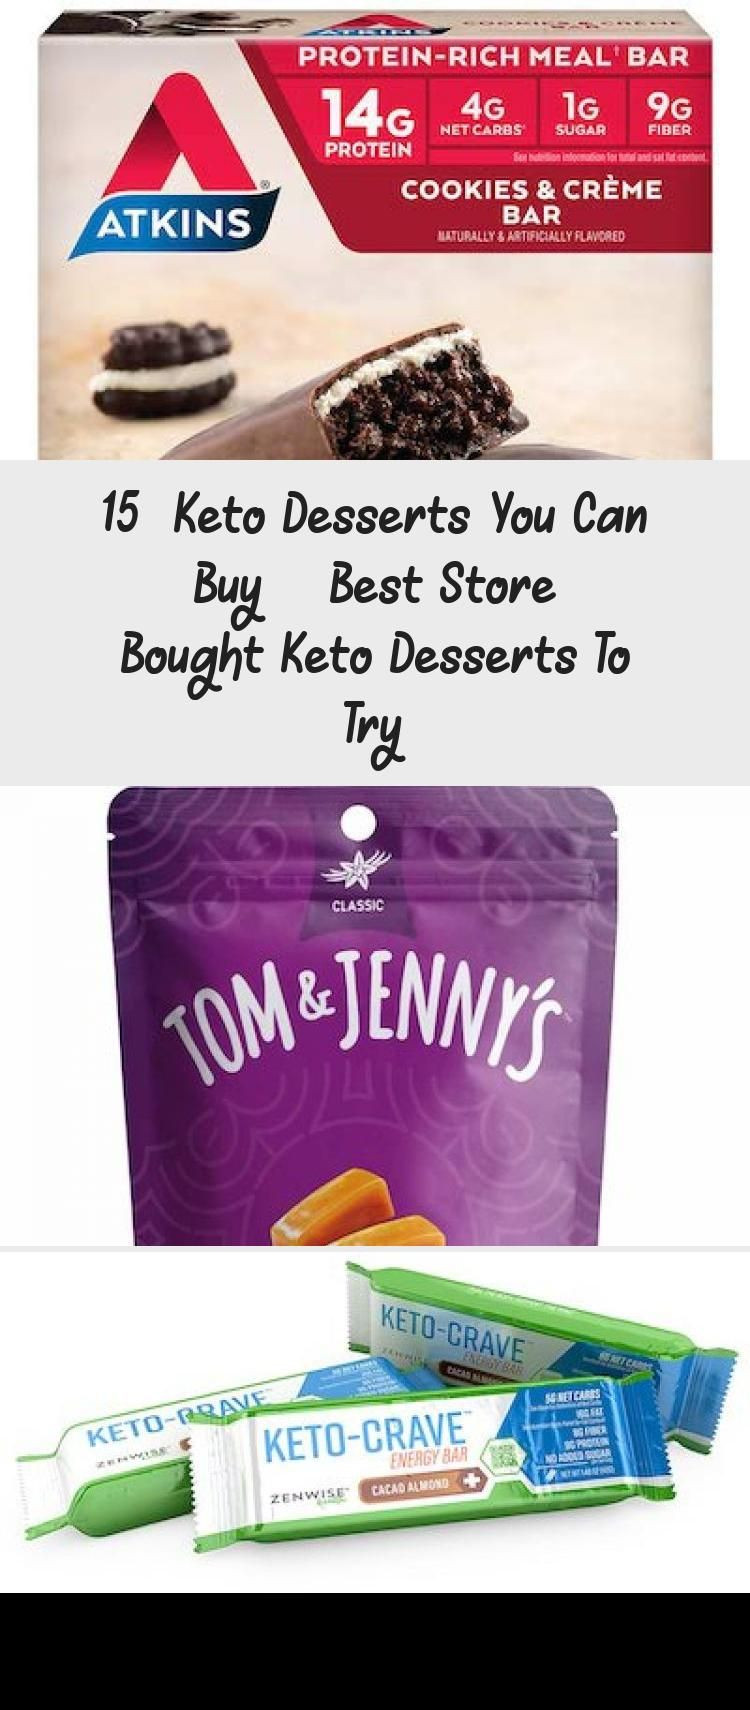 Low Cholesterol Desserts Store Bought
 Best Store Bought Keto Desserts You Can Buy These low